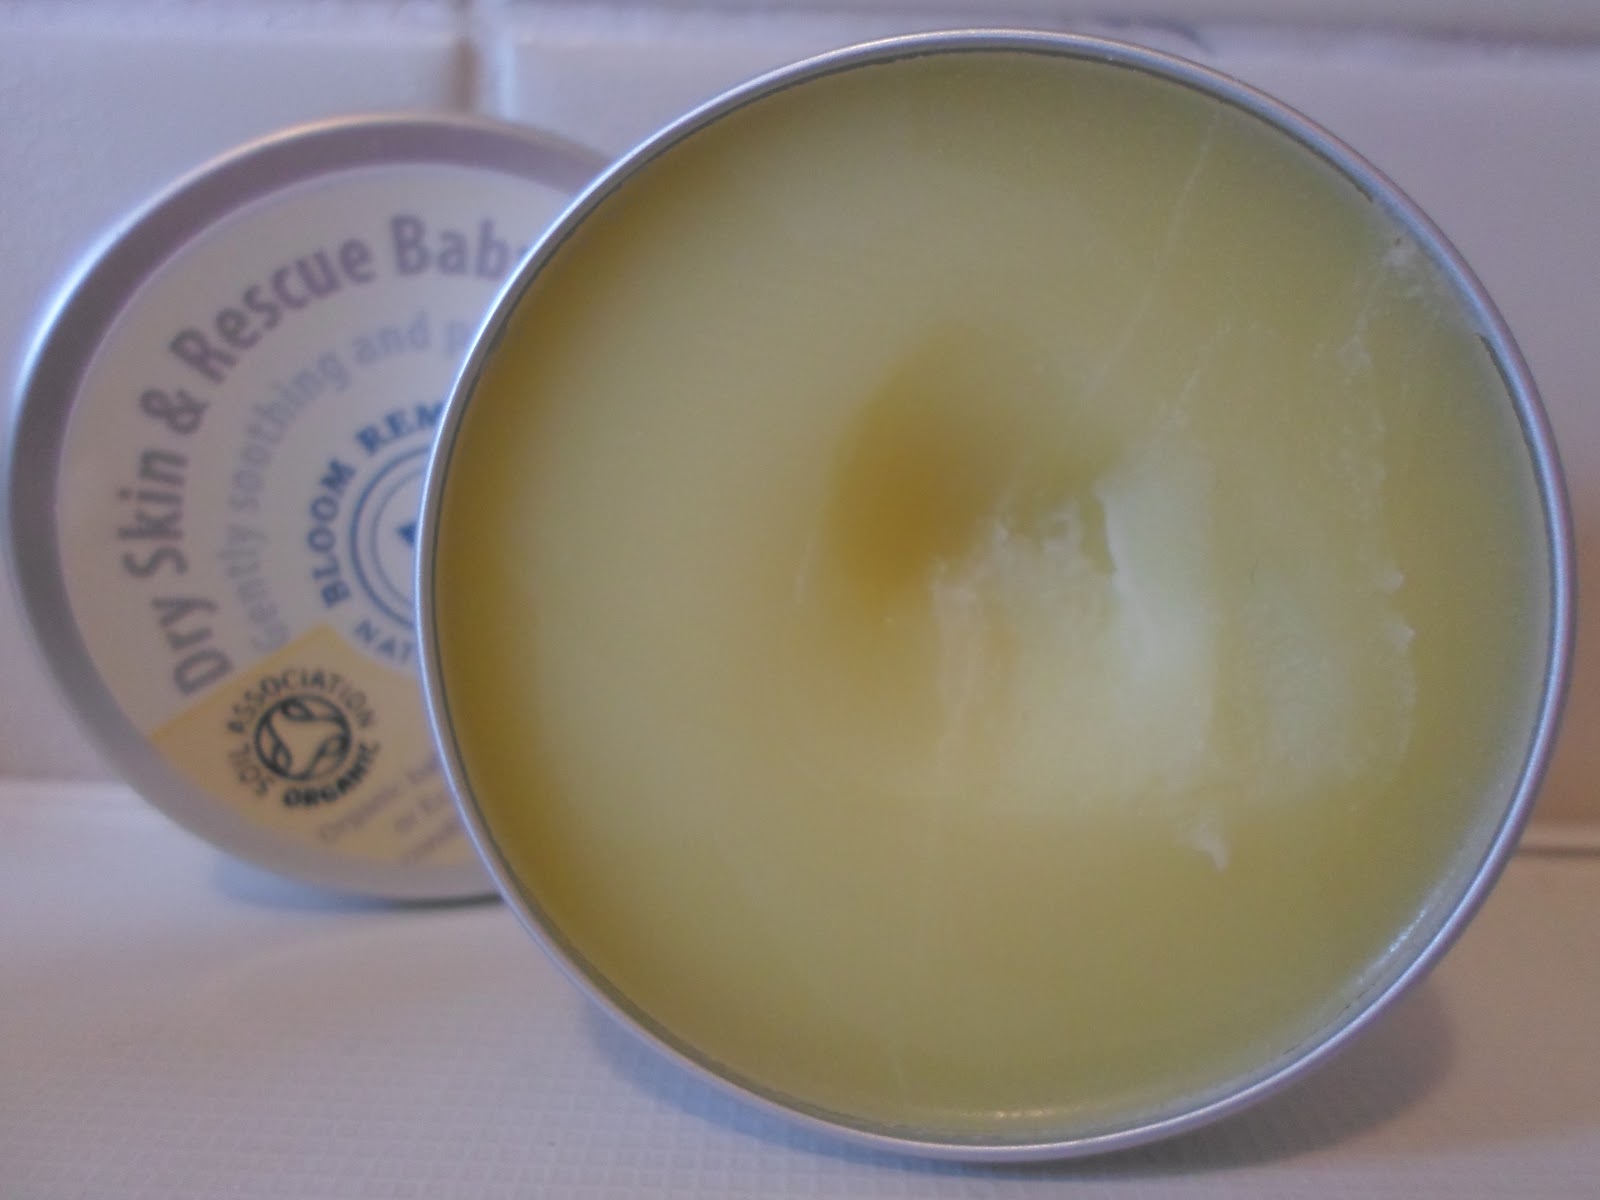 Bloom Remedies Dry Skin & Rescue Baby Balm